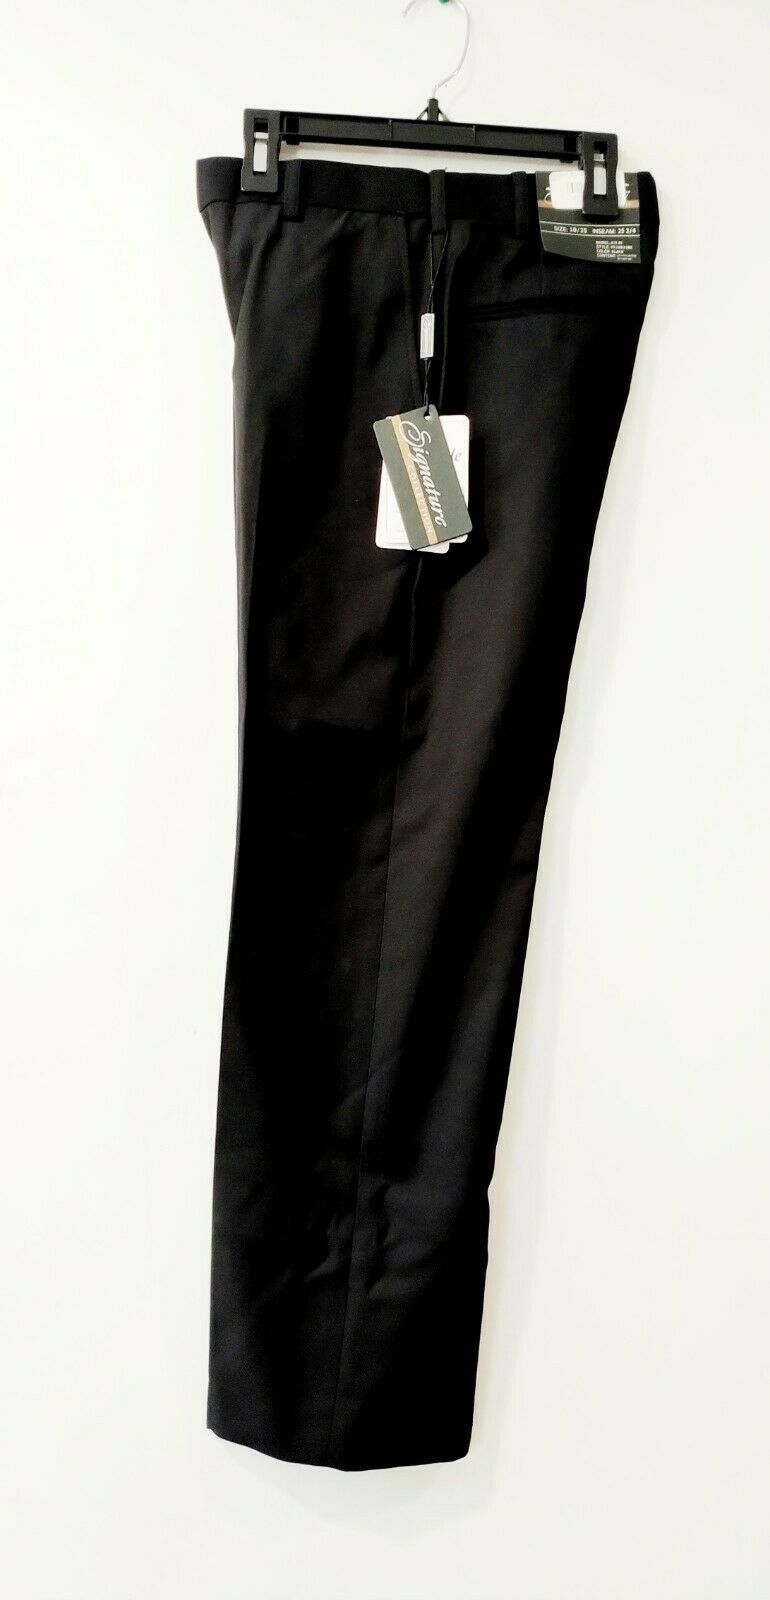 Dress Pants Boys Trousers Size 18 / 29 Black Color NWT Signature Collections